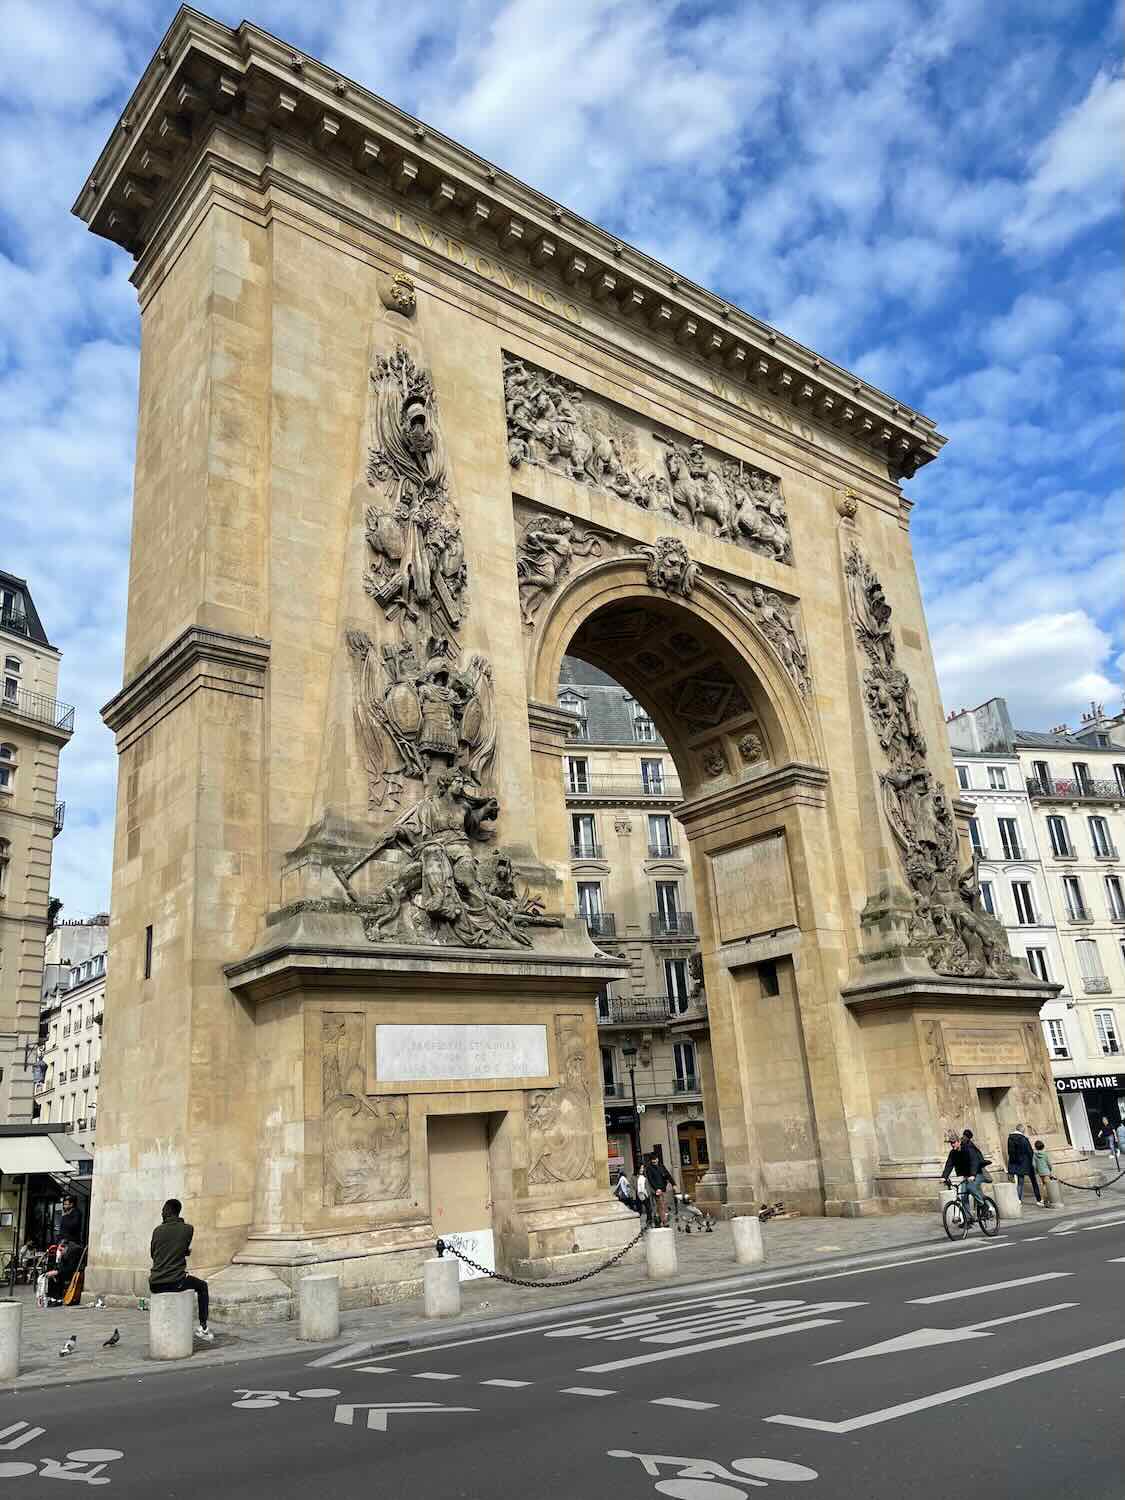 The photo shows the Porte Saint-Denis, a large arch monument in Paris, France. It features intricate relief sculptures and is made of stone, standing prominently against a clear sky. The surrounding area includes pedestrians and cyclists, capturing a lively urban scene.